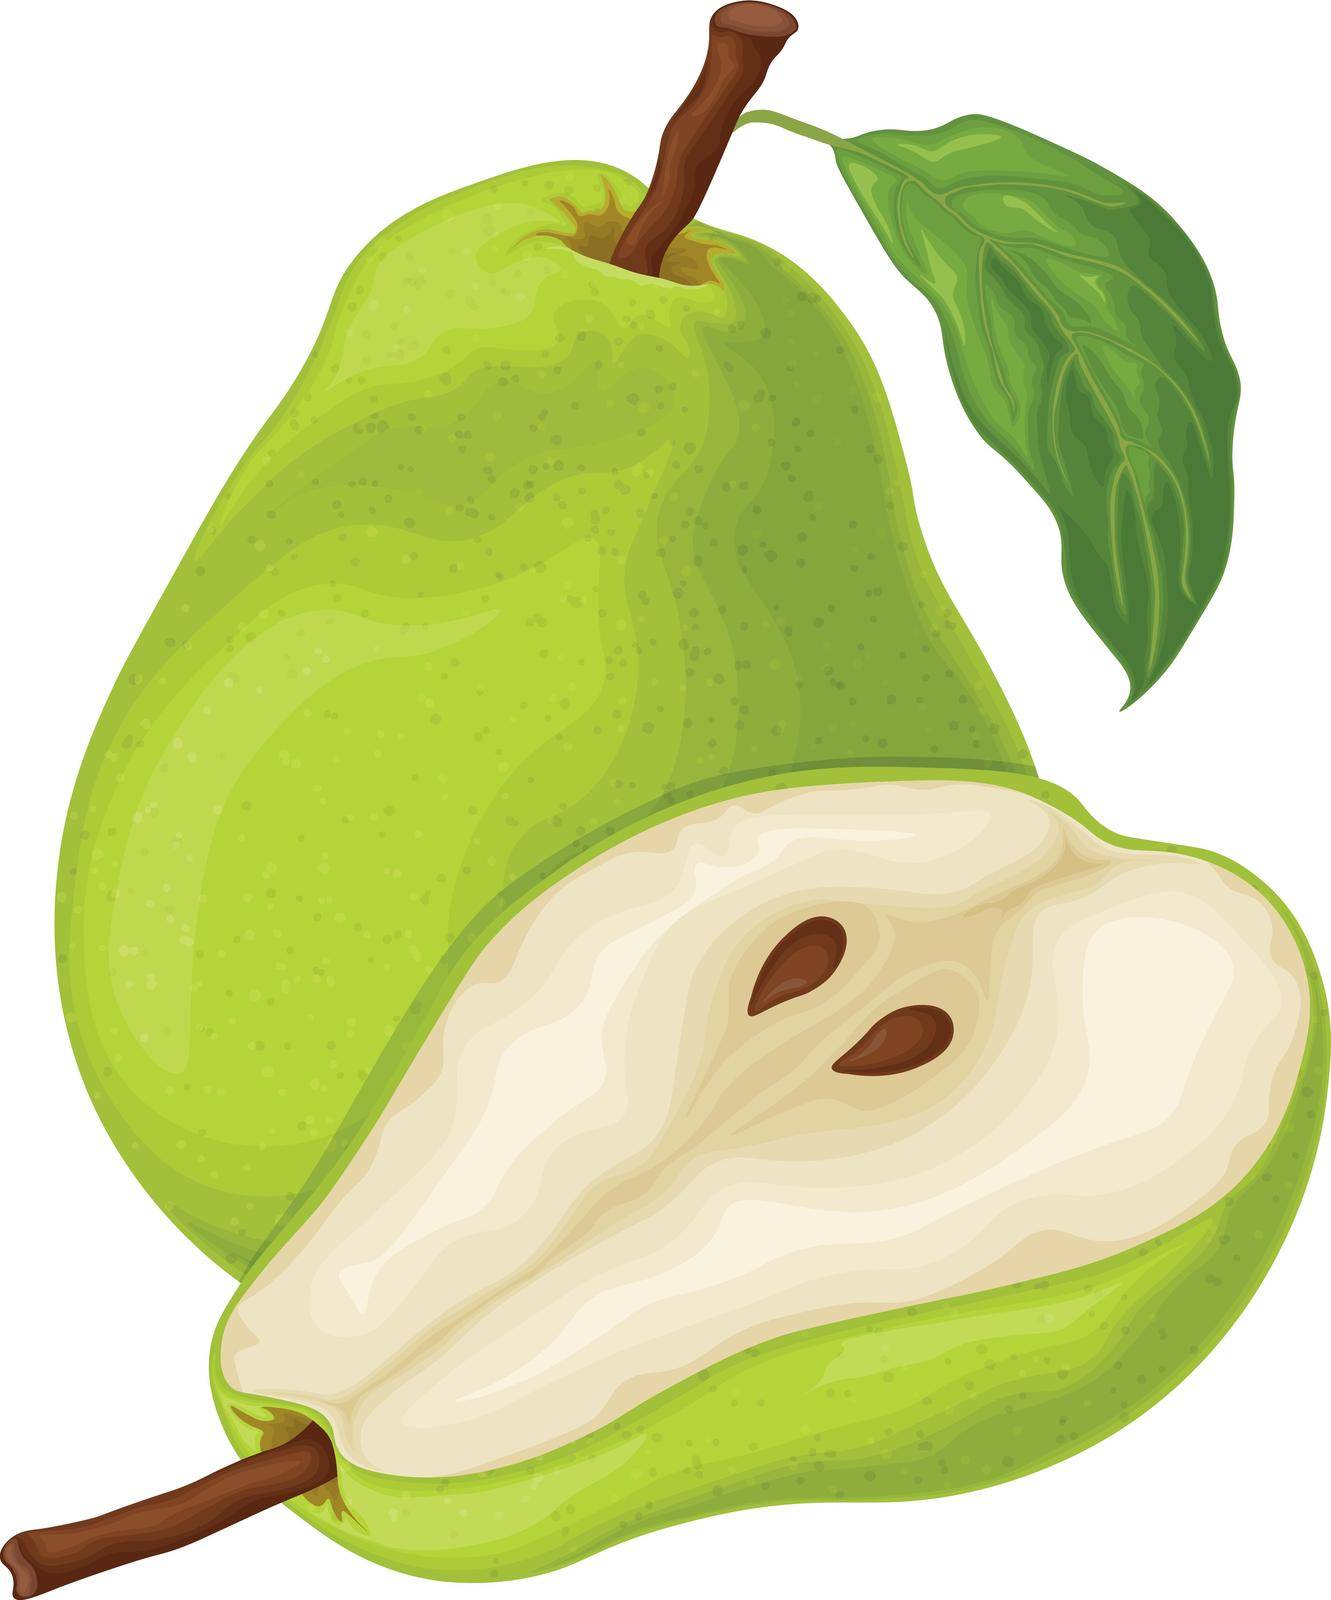 Pear. An image of a ripe green pear. A cut piece of pear. Sweet fruit from the garden. Vegetarian vitamin product. Vector illustration.